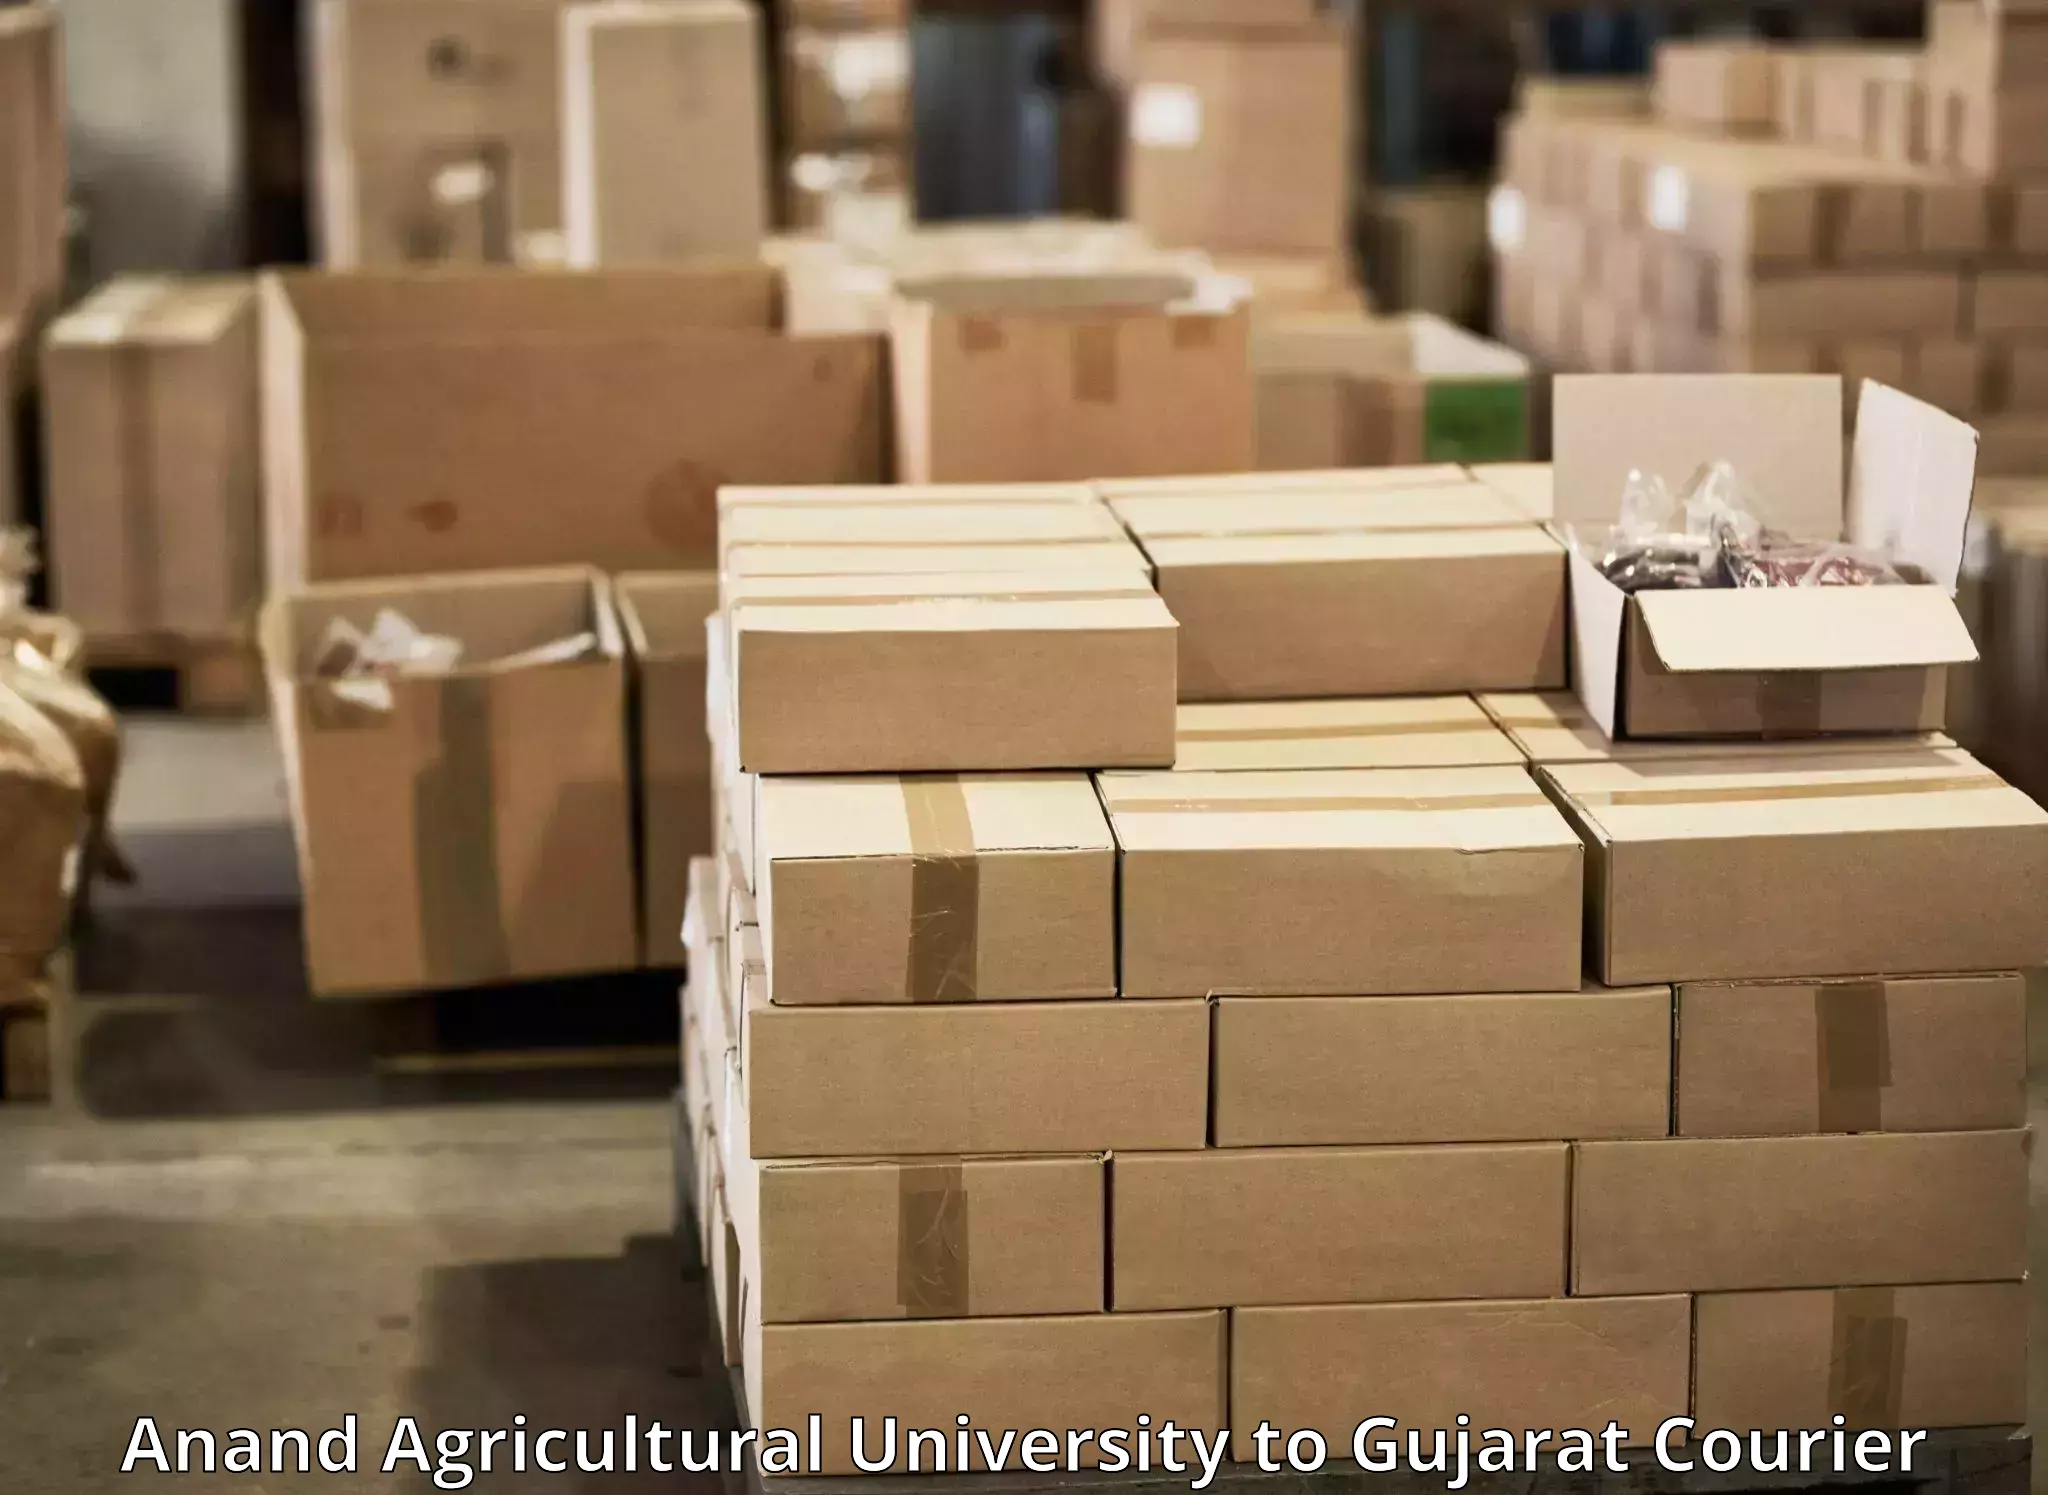 Courier service efficiency Anand Agricultural University to GIDC